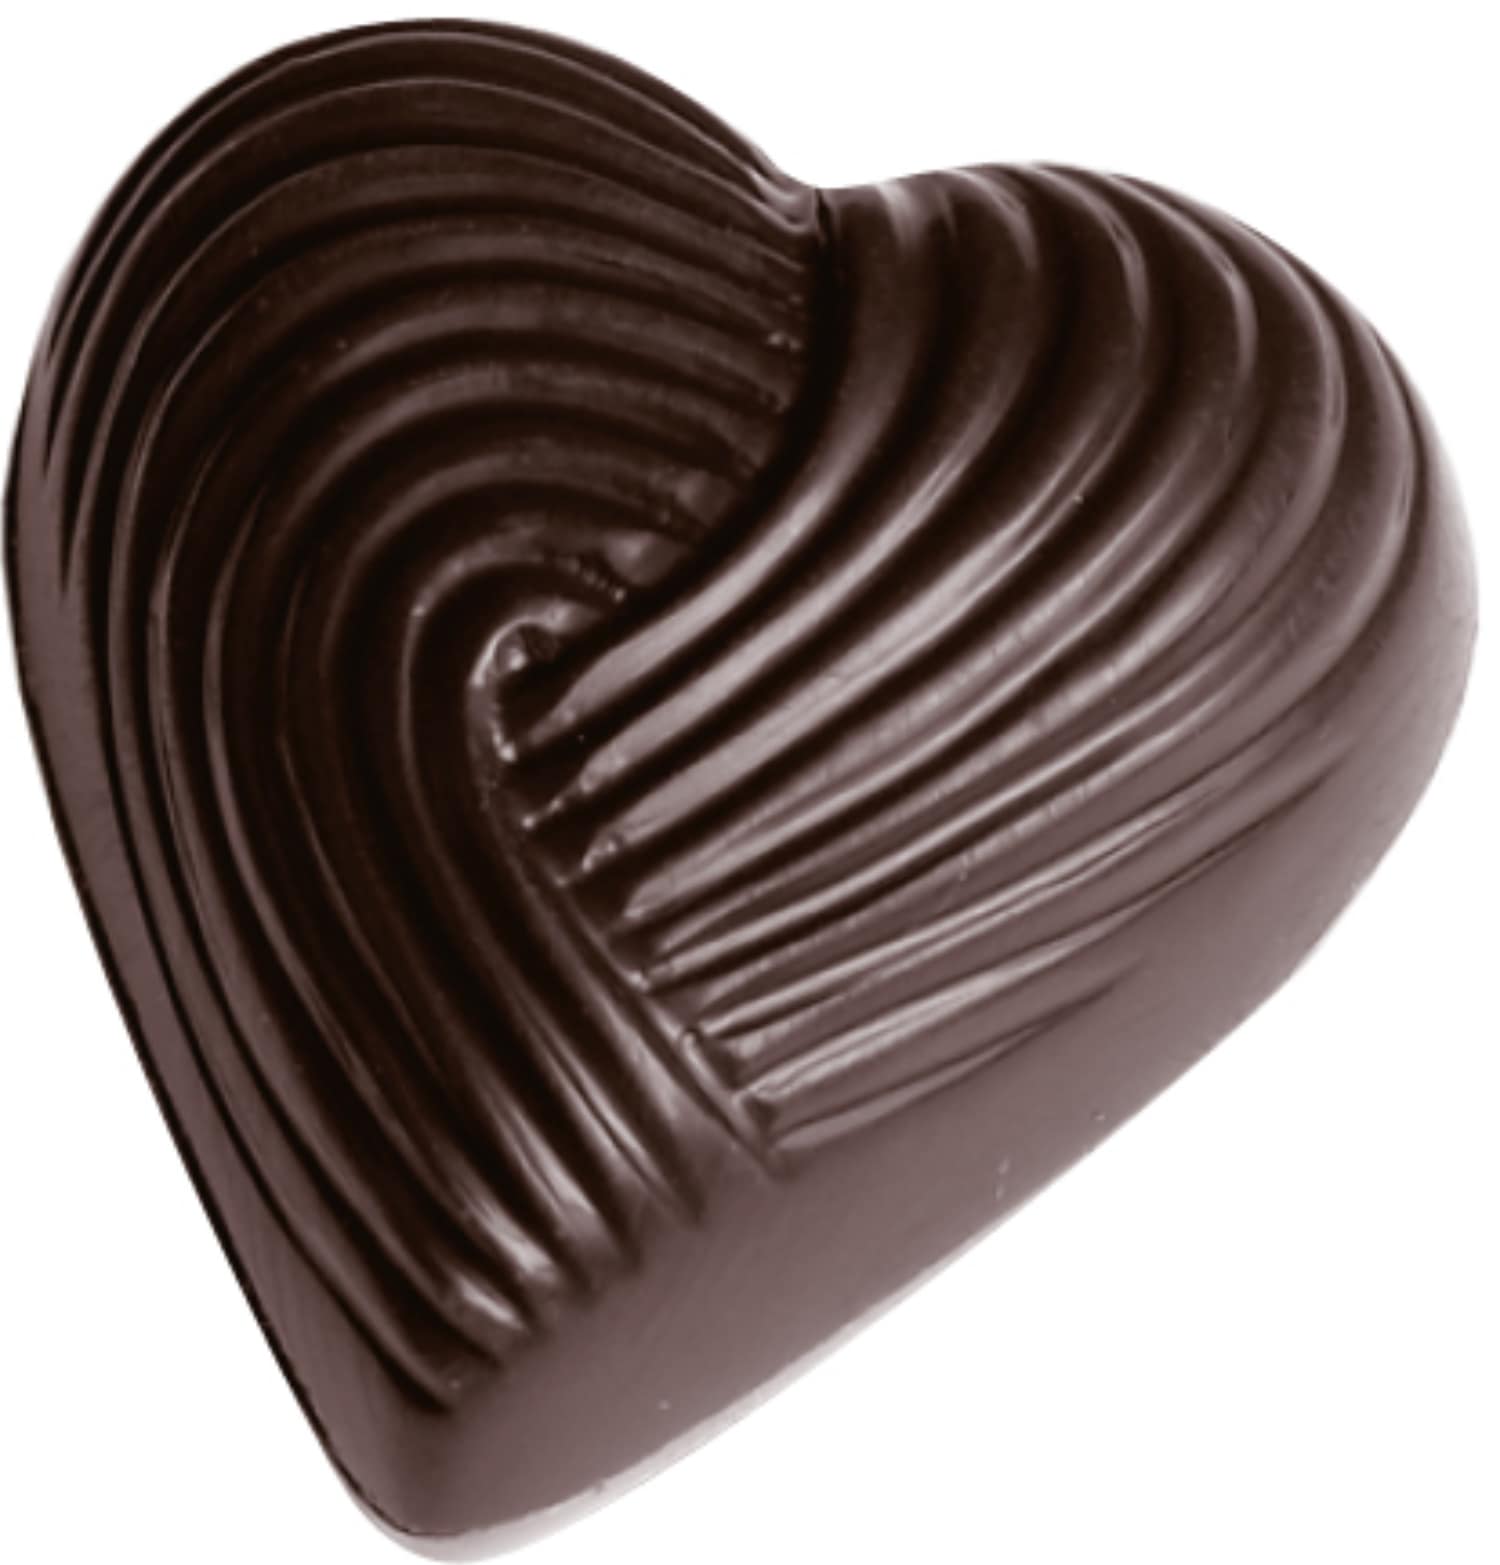 Chocolate mould "heart" 421513